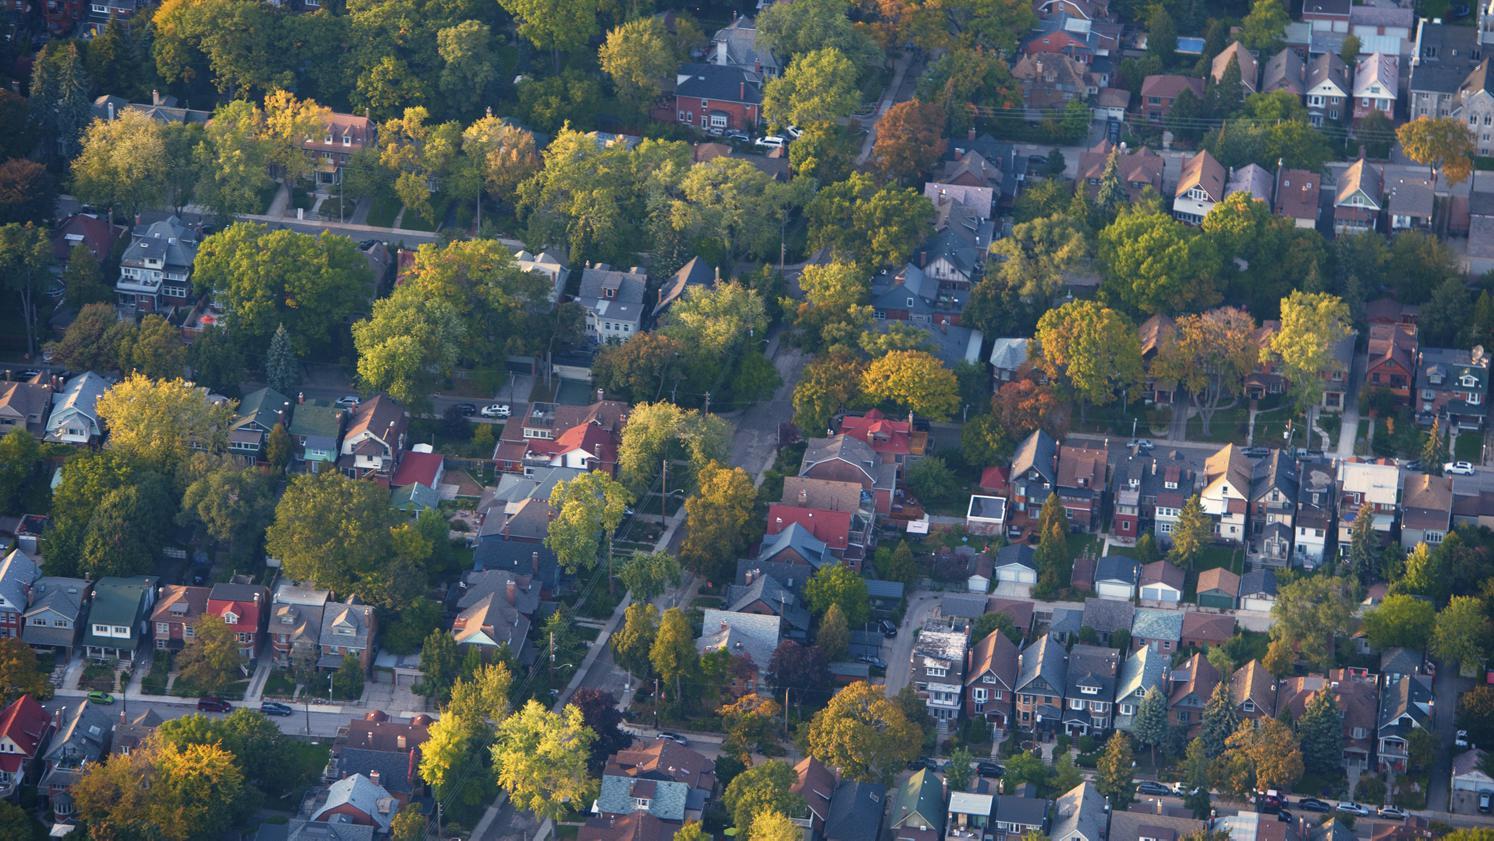 An aerial view of tree-lined, residential streets.